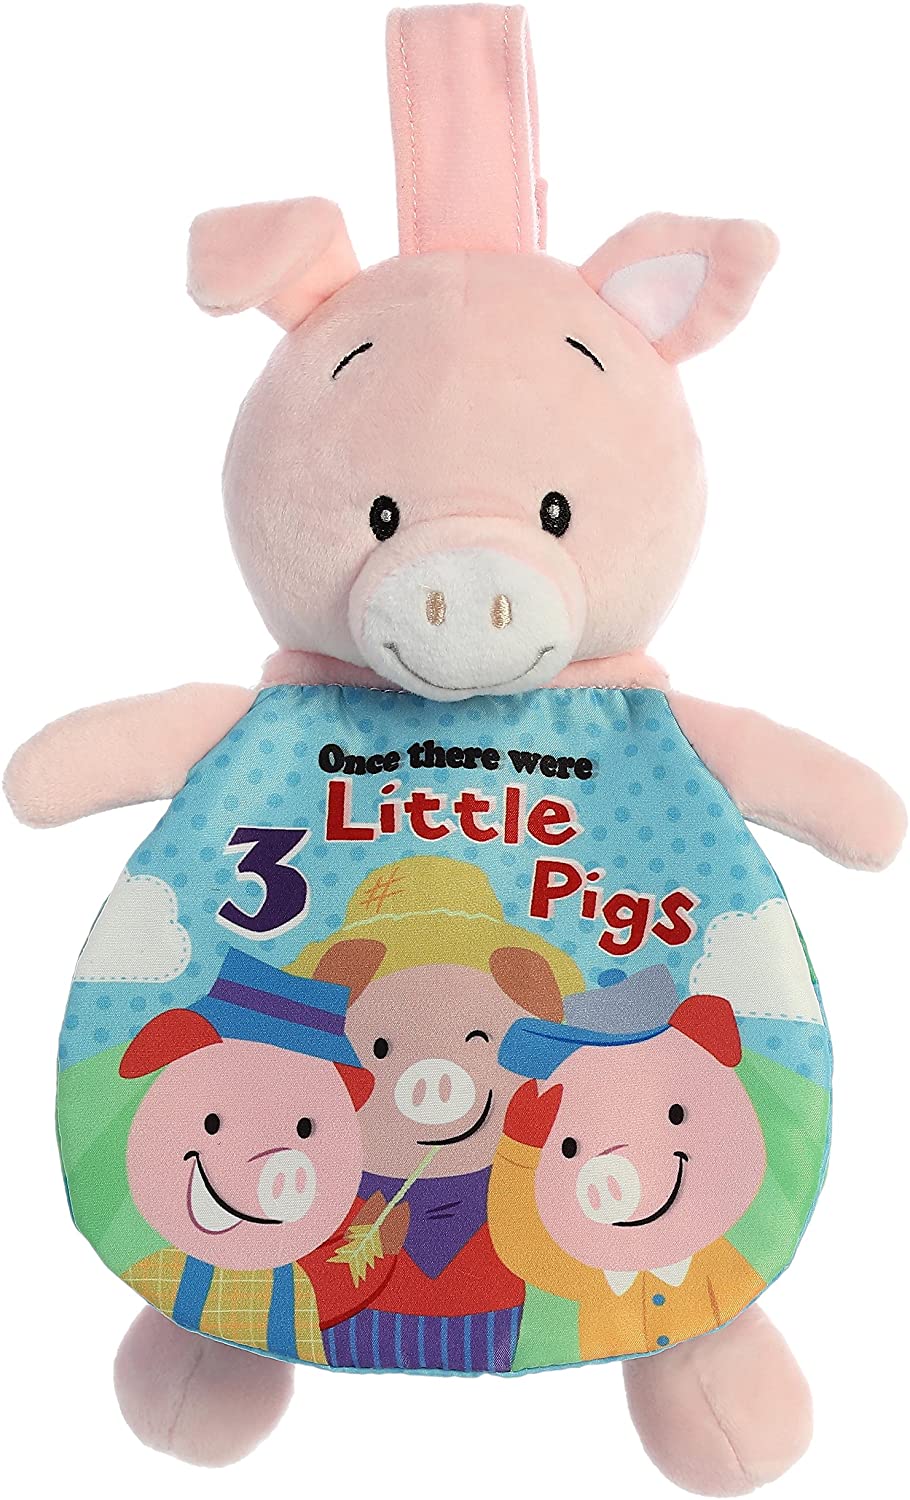 3 Little Pigs Soft Book Story Pal by Ebba